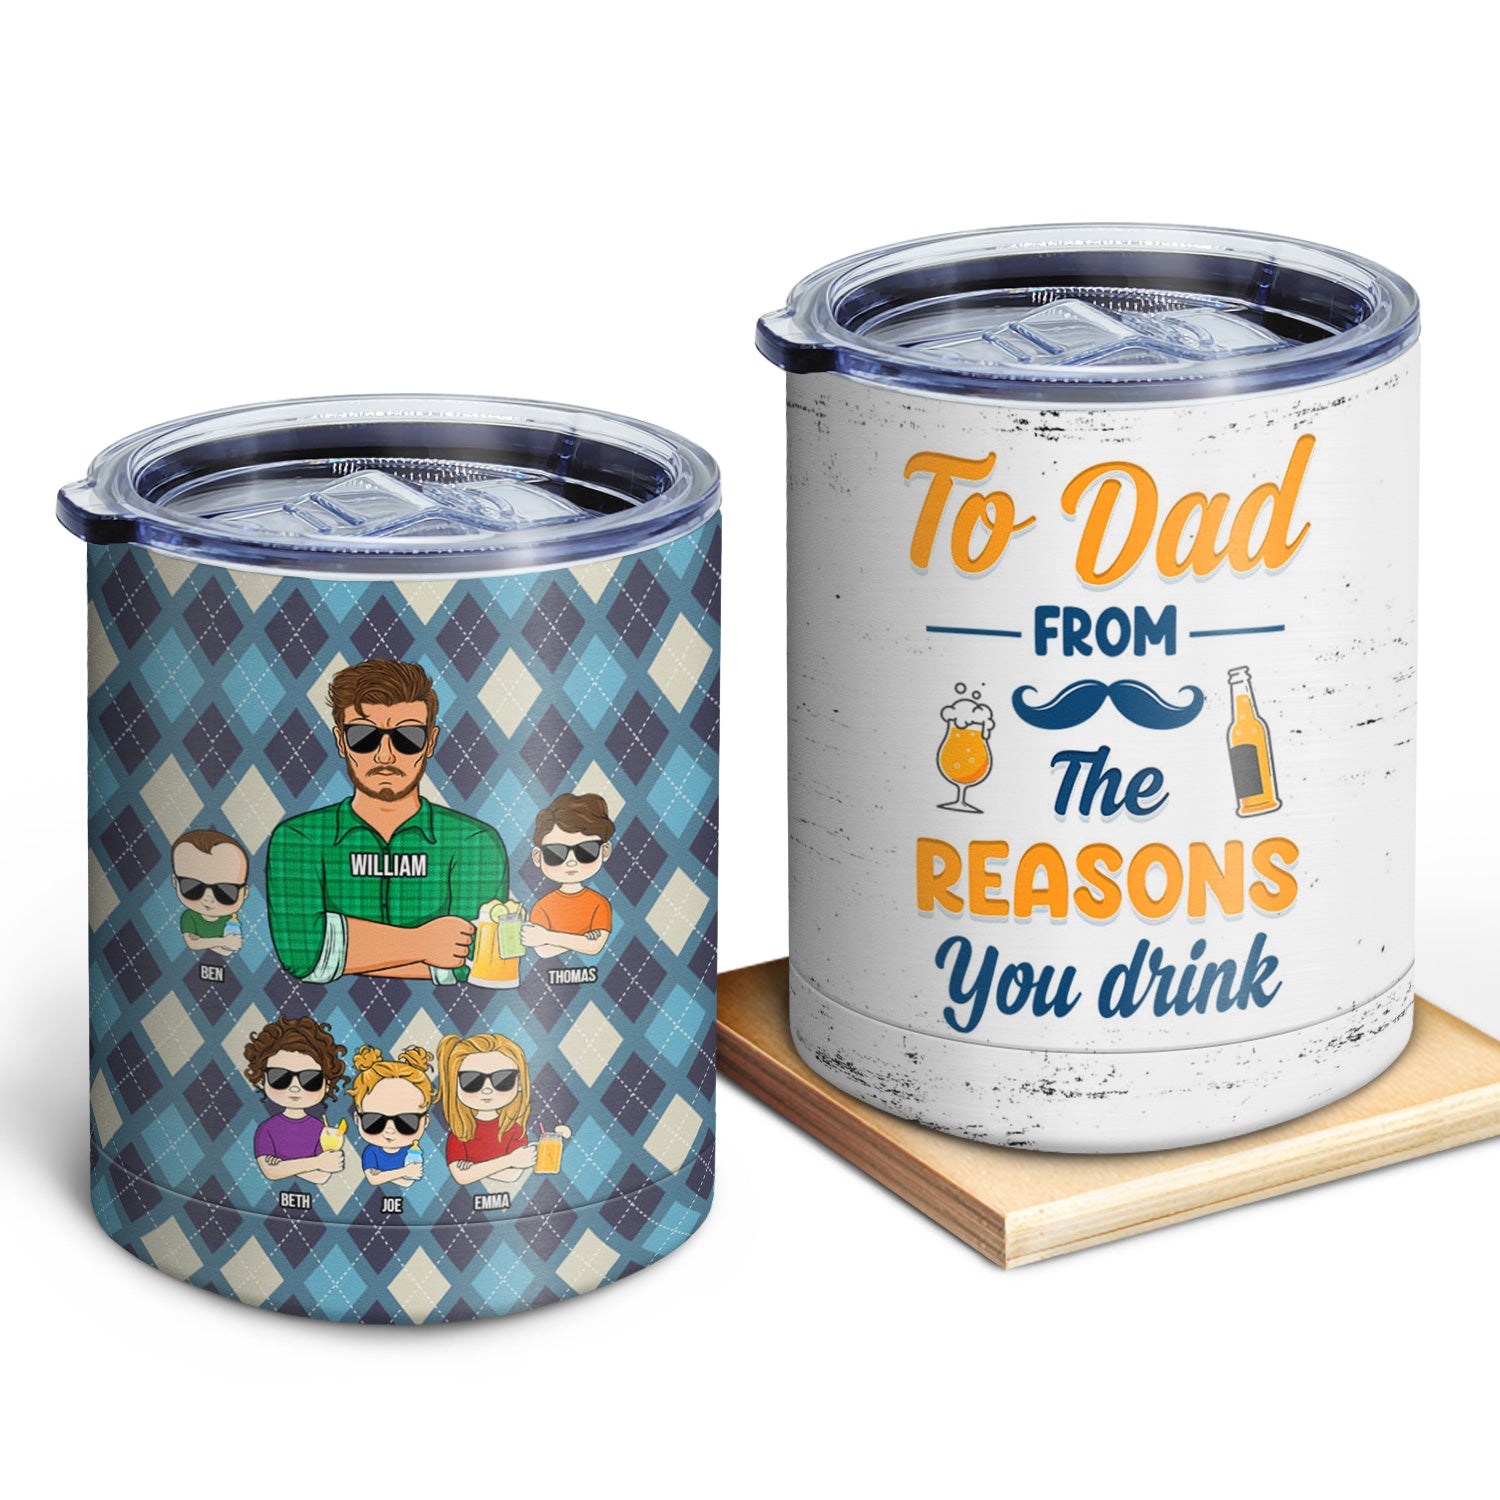 From The Reasons You Drink - Gift For Dad, Father - Personalized Lowball Tumbler